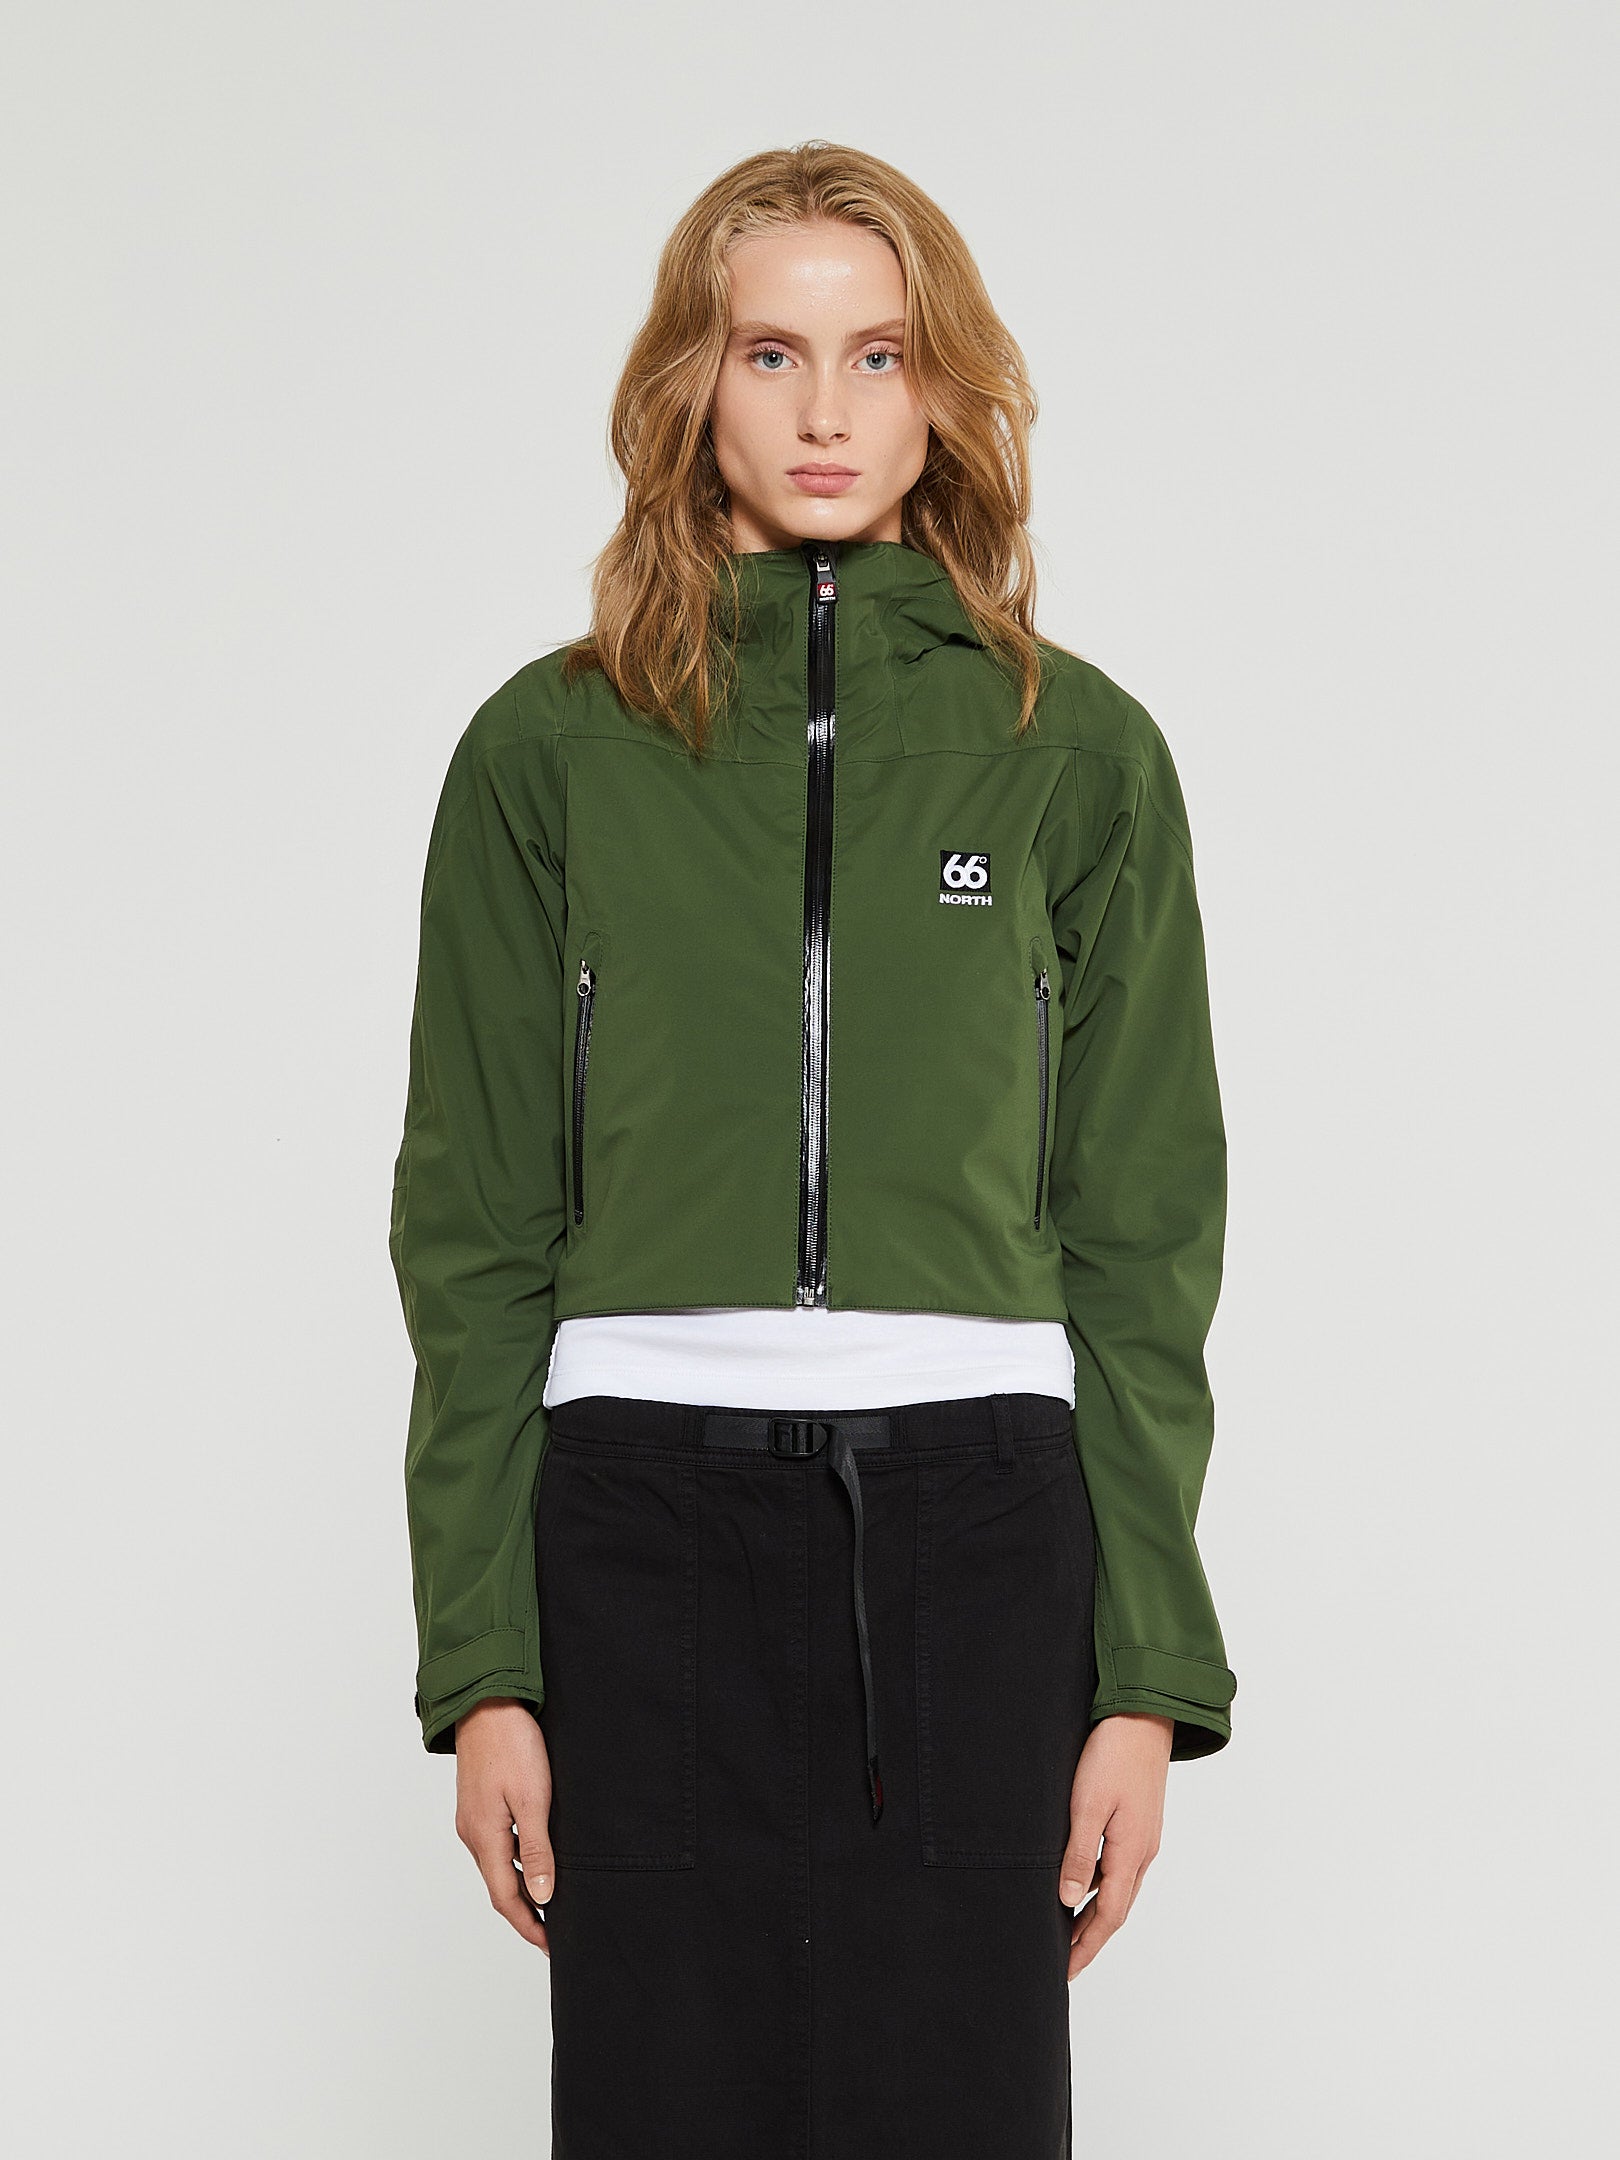 66NORTH - Snaefell W Cropped Neoshell Jacket in Olive